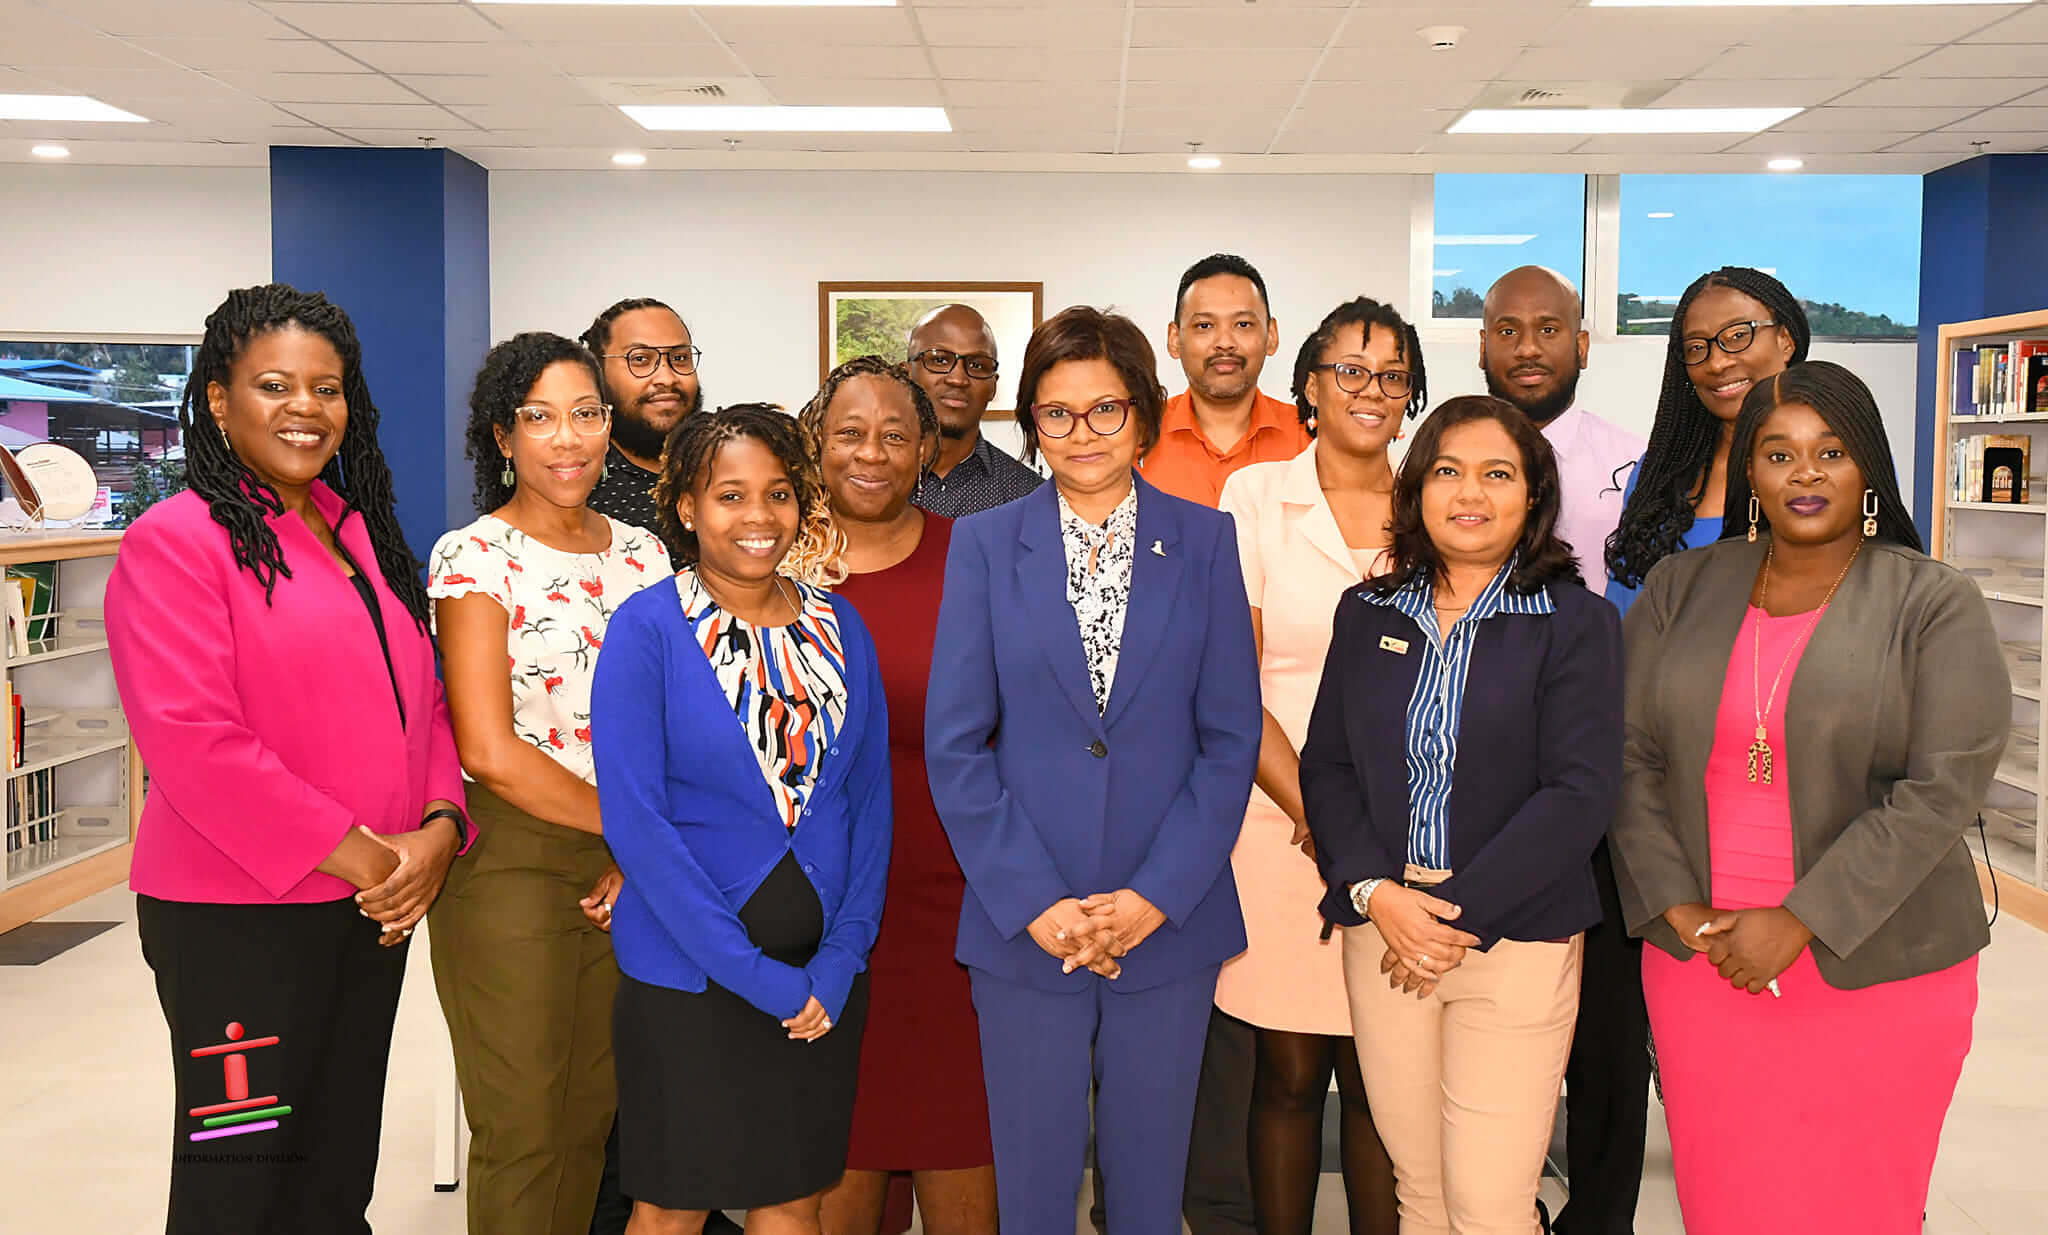 Her Excellency visits the new Diego Martin Public Library